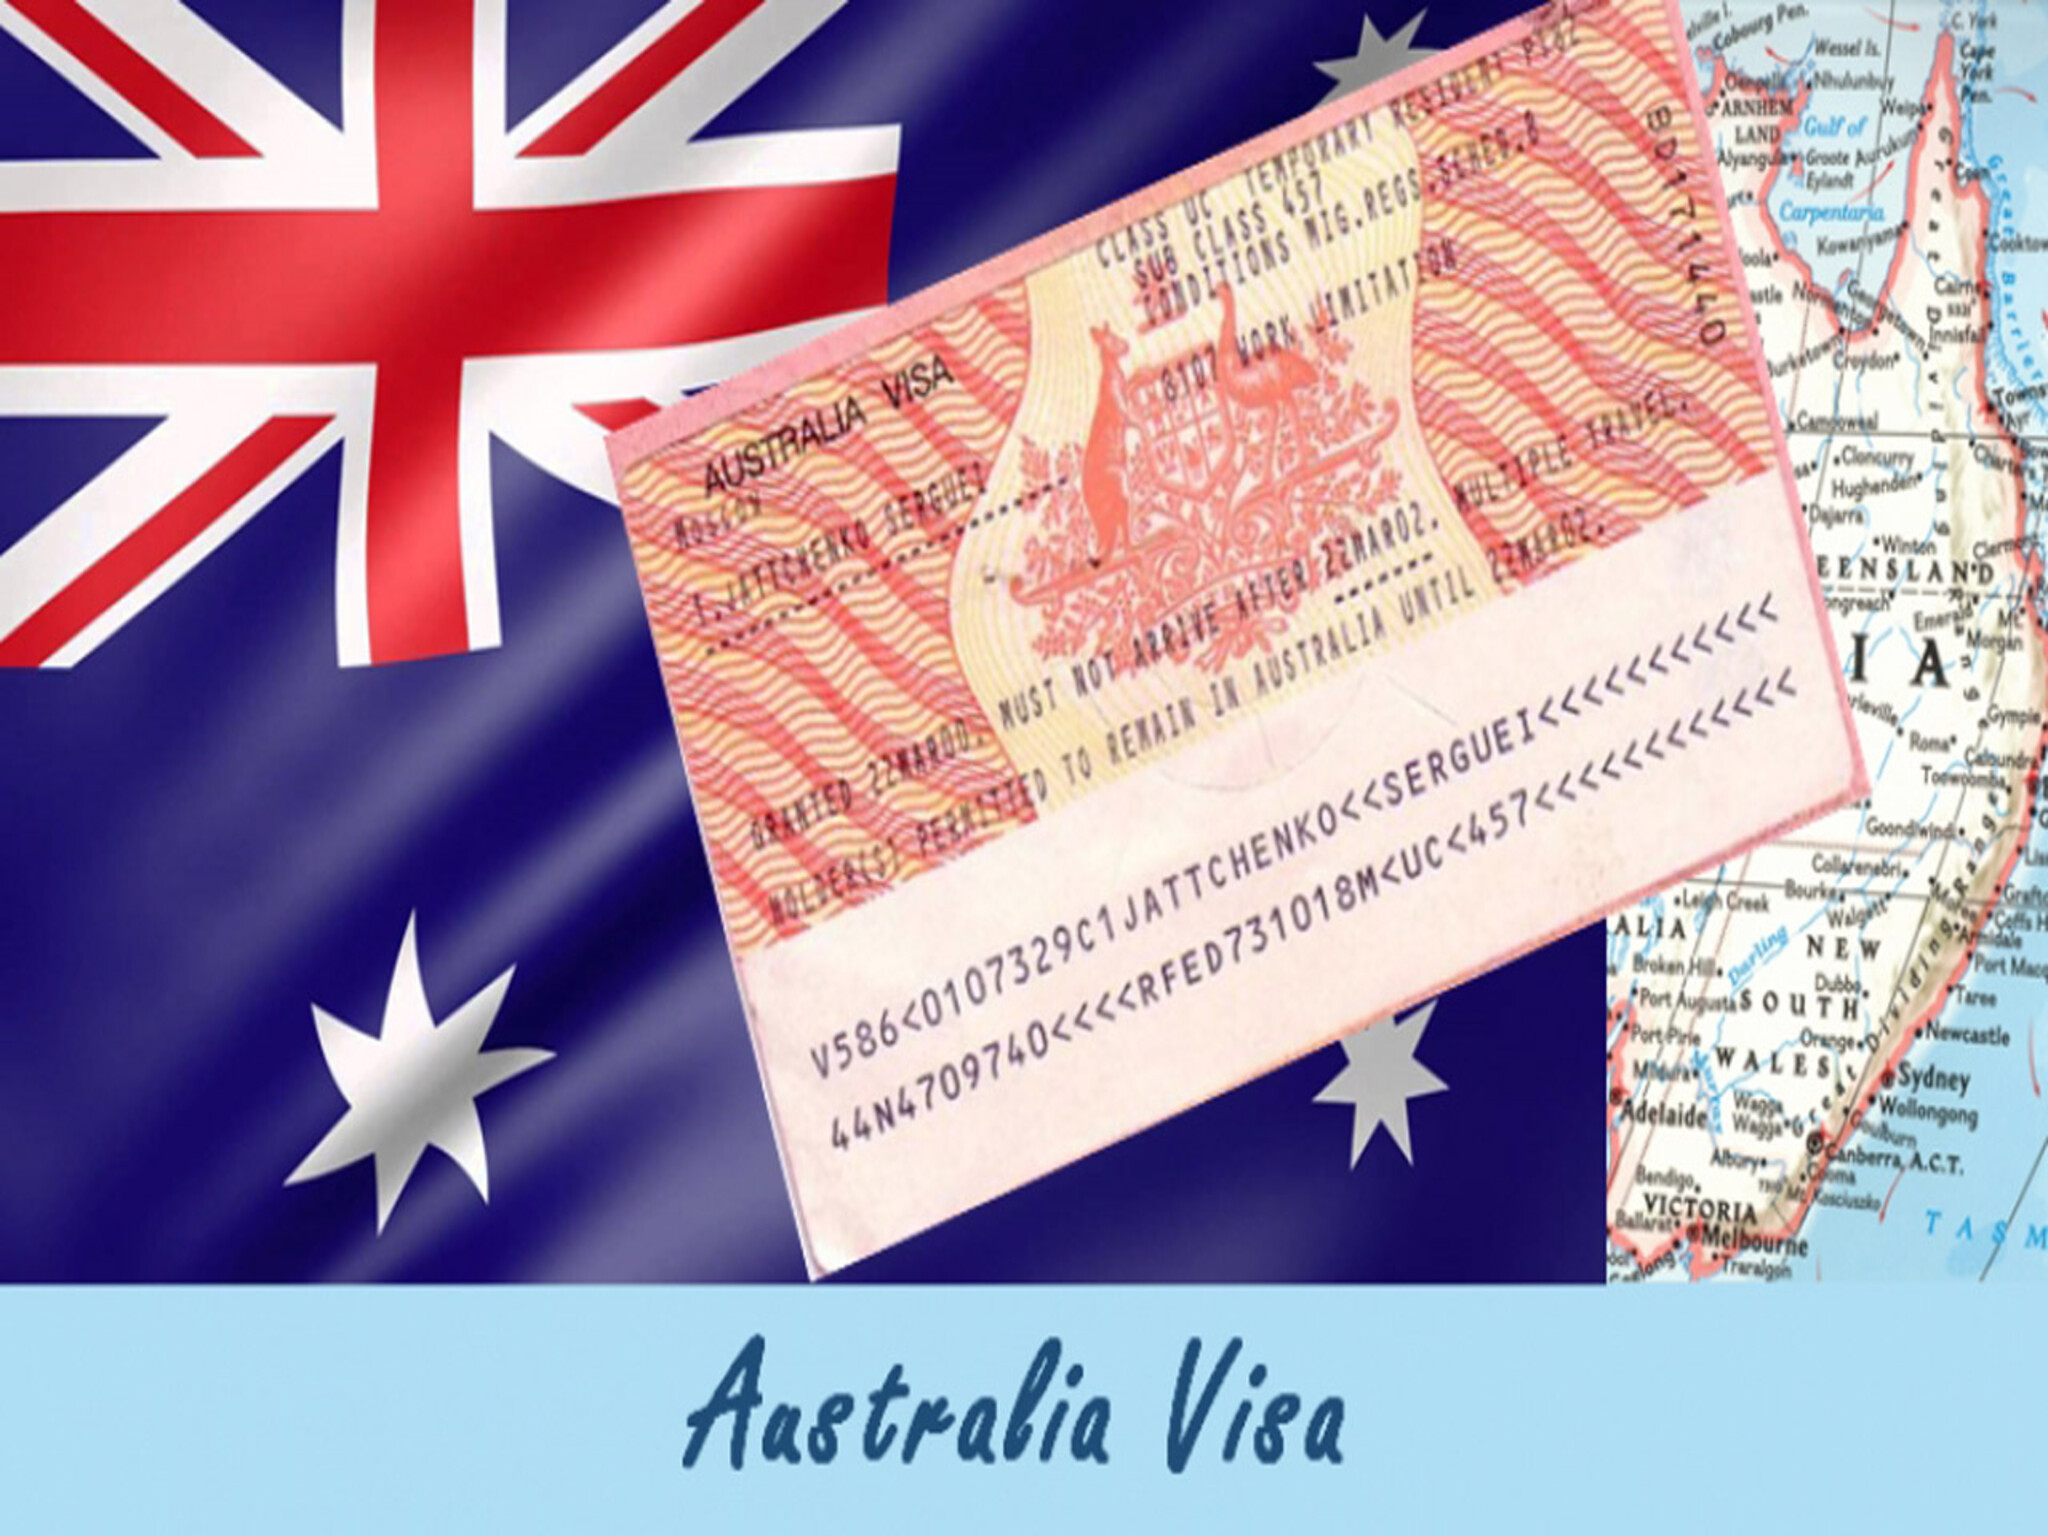 Australia announces a new visa to live there